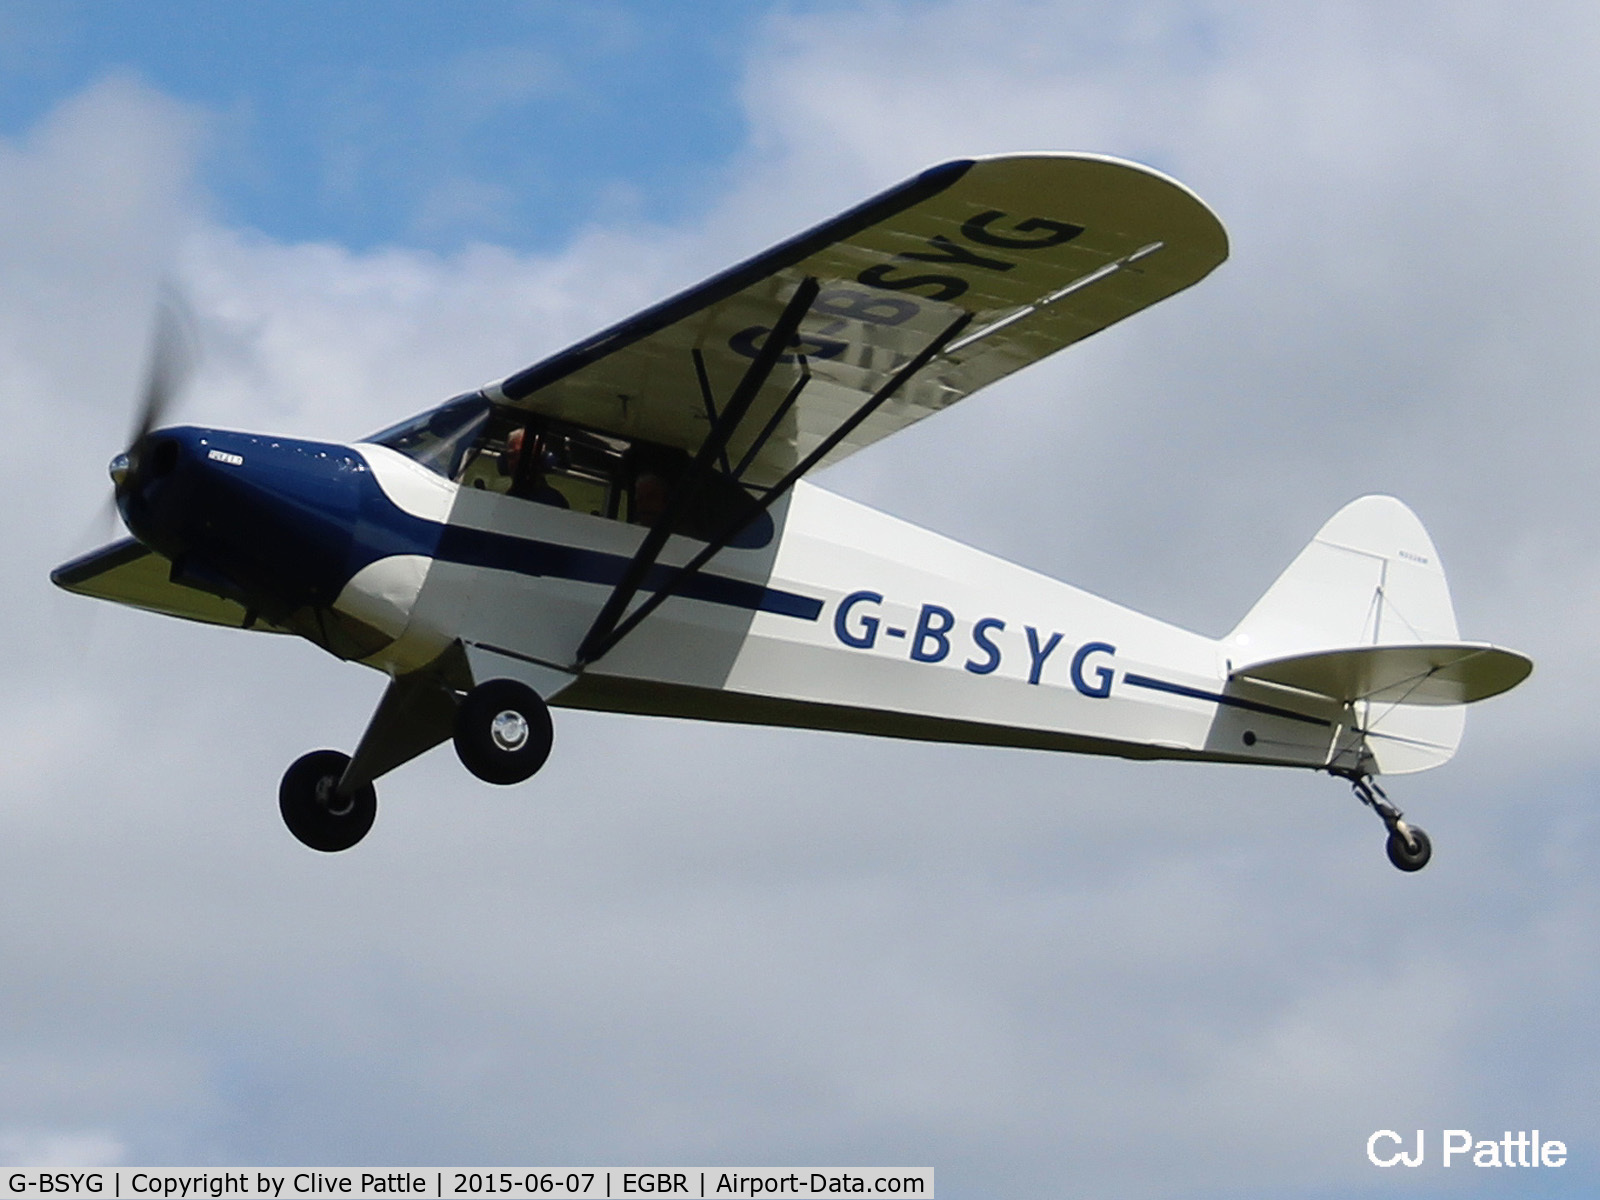 G-BSYG, 1947 Piper PA-12 Super Cruiser C/N 12-2106, In action at The Real Aeroplane Company Ltd Radial Fly-In, Breighton Airfield, Yorkshire, U.K.  - EGBR